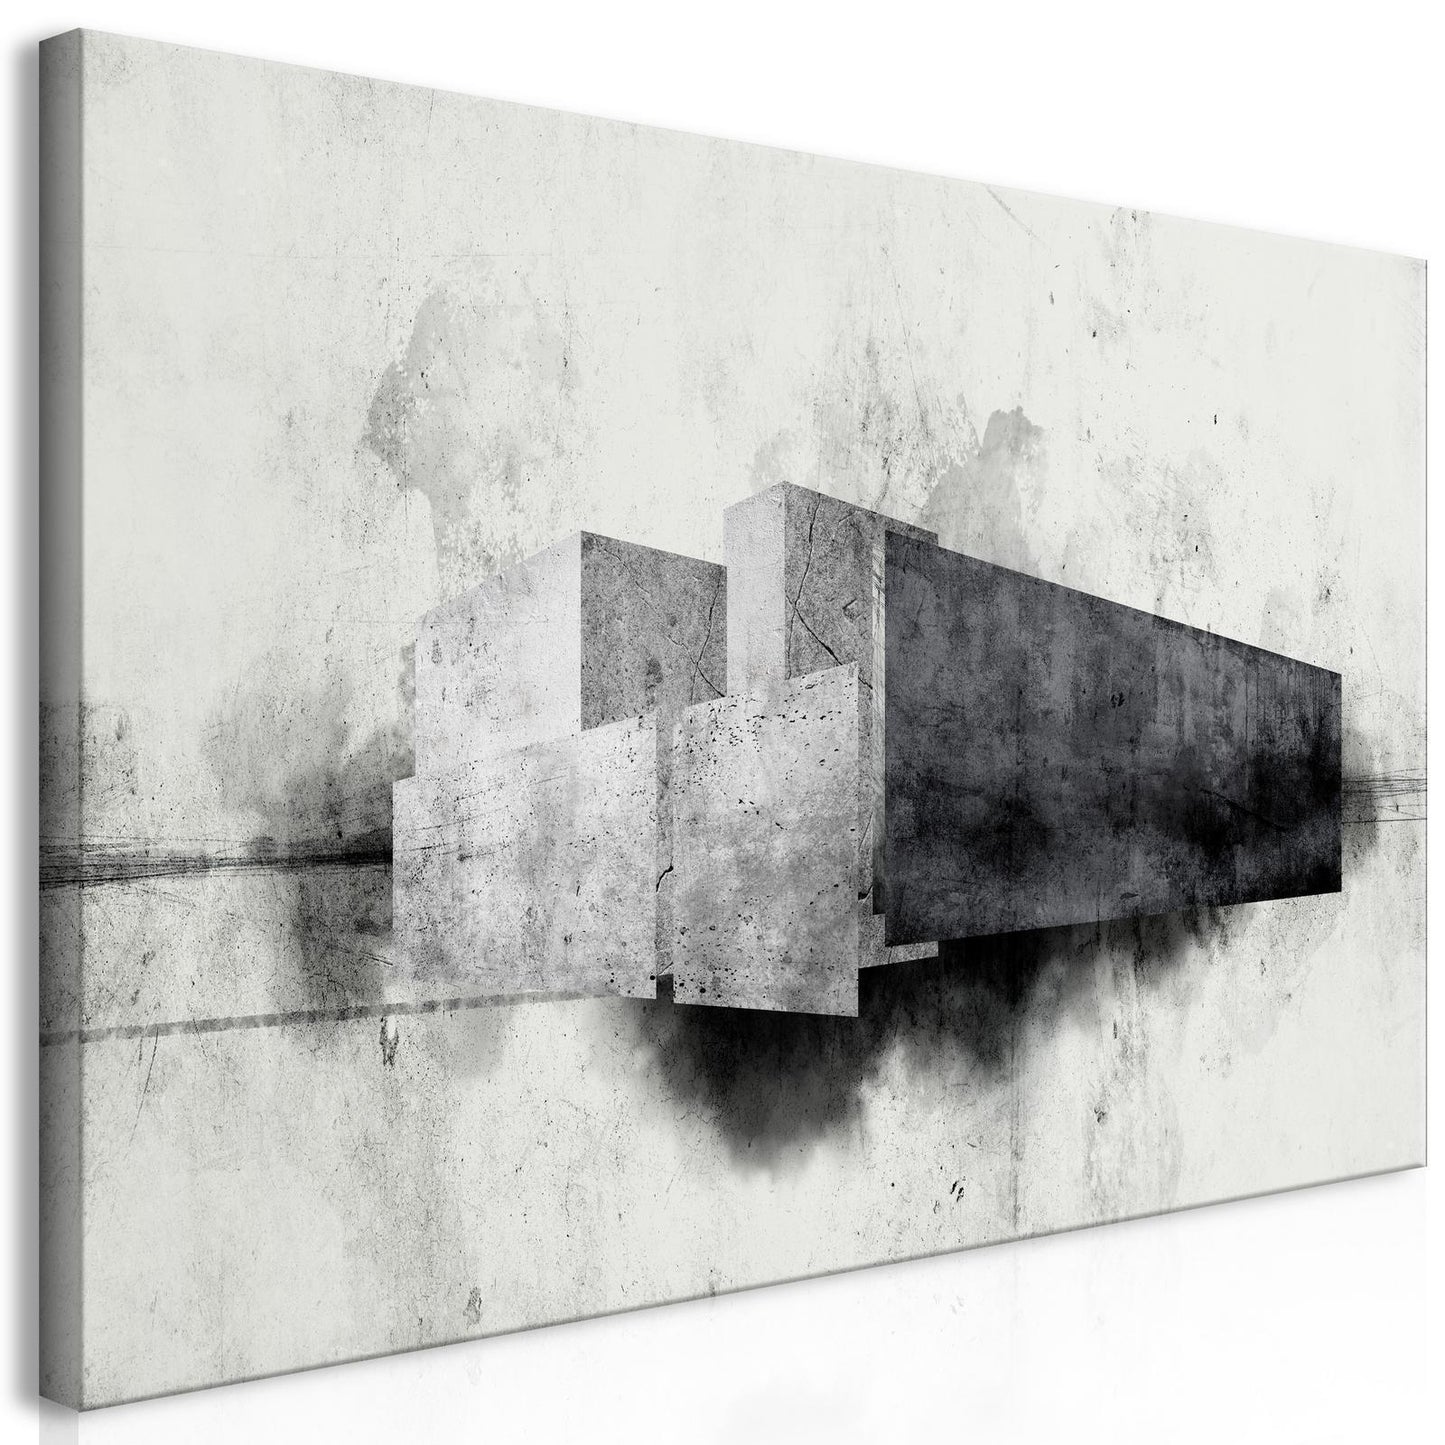 Painting - Architectural Variation (1 Part)